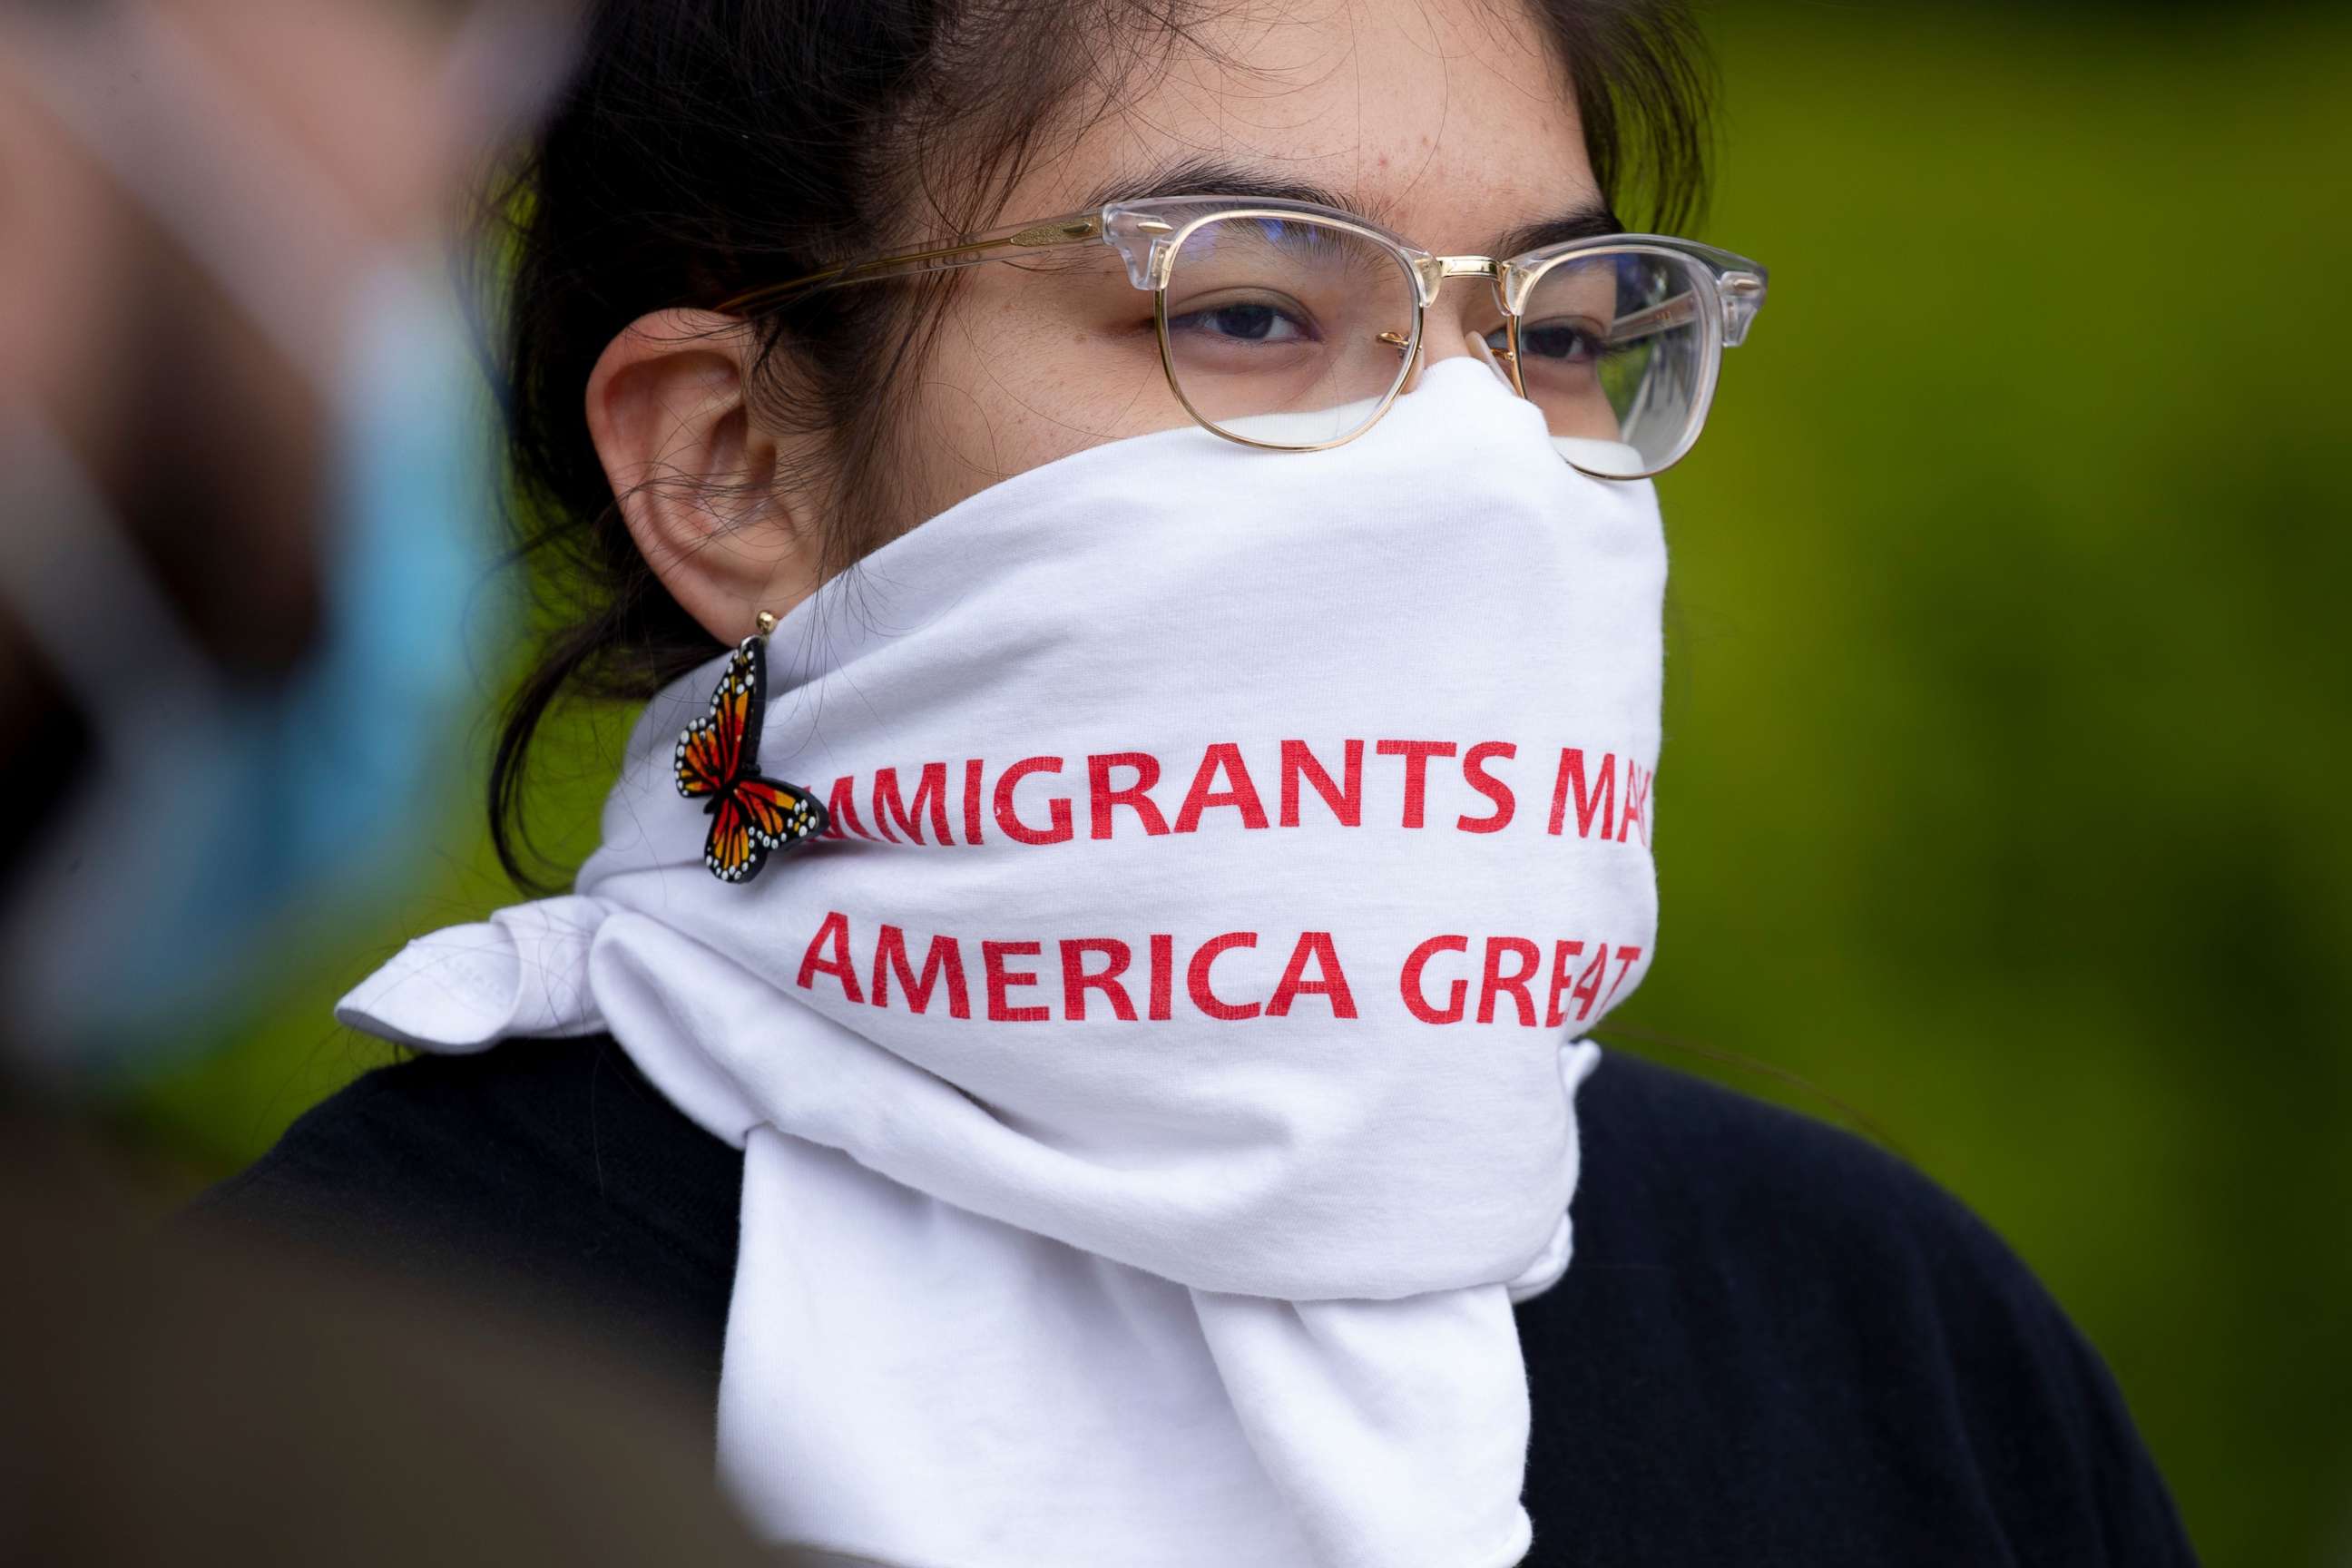 PHOTO: A participant wears a covering on her face that reads "Immigrants Make America Great," during a demonstration held by immigration advocates and 'DREAMers' outside the U.S. Supreme Court in Washington, April 27, 2020.